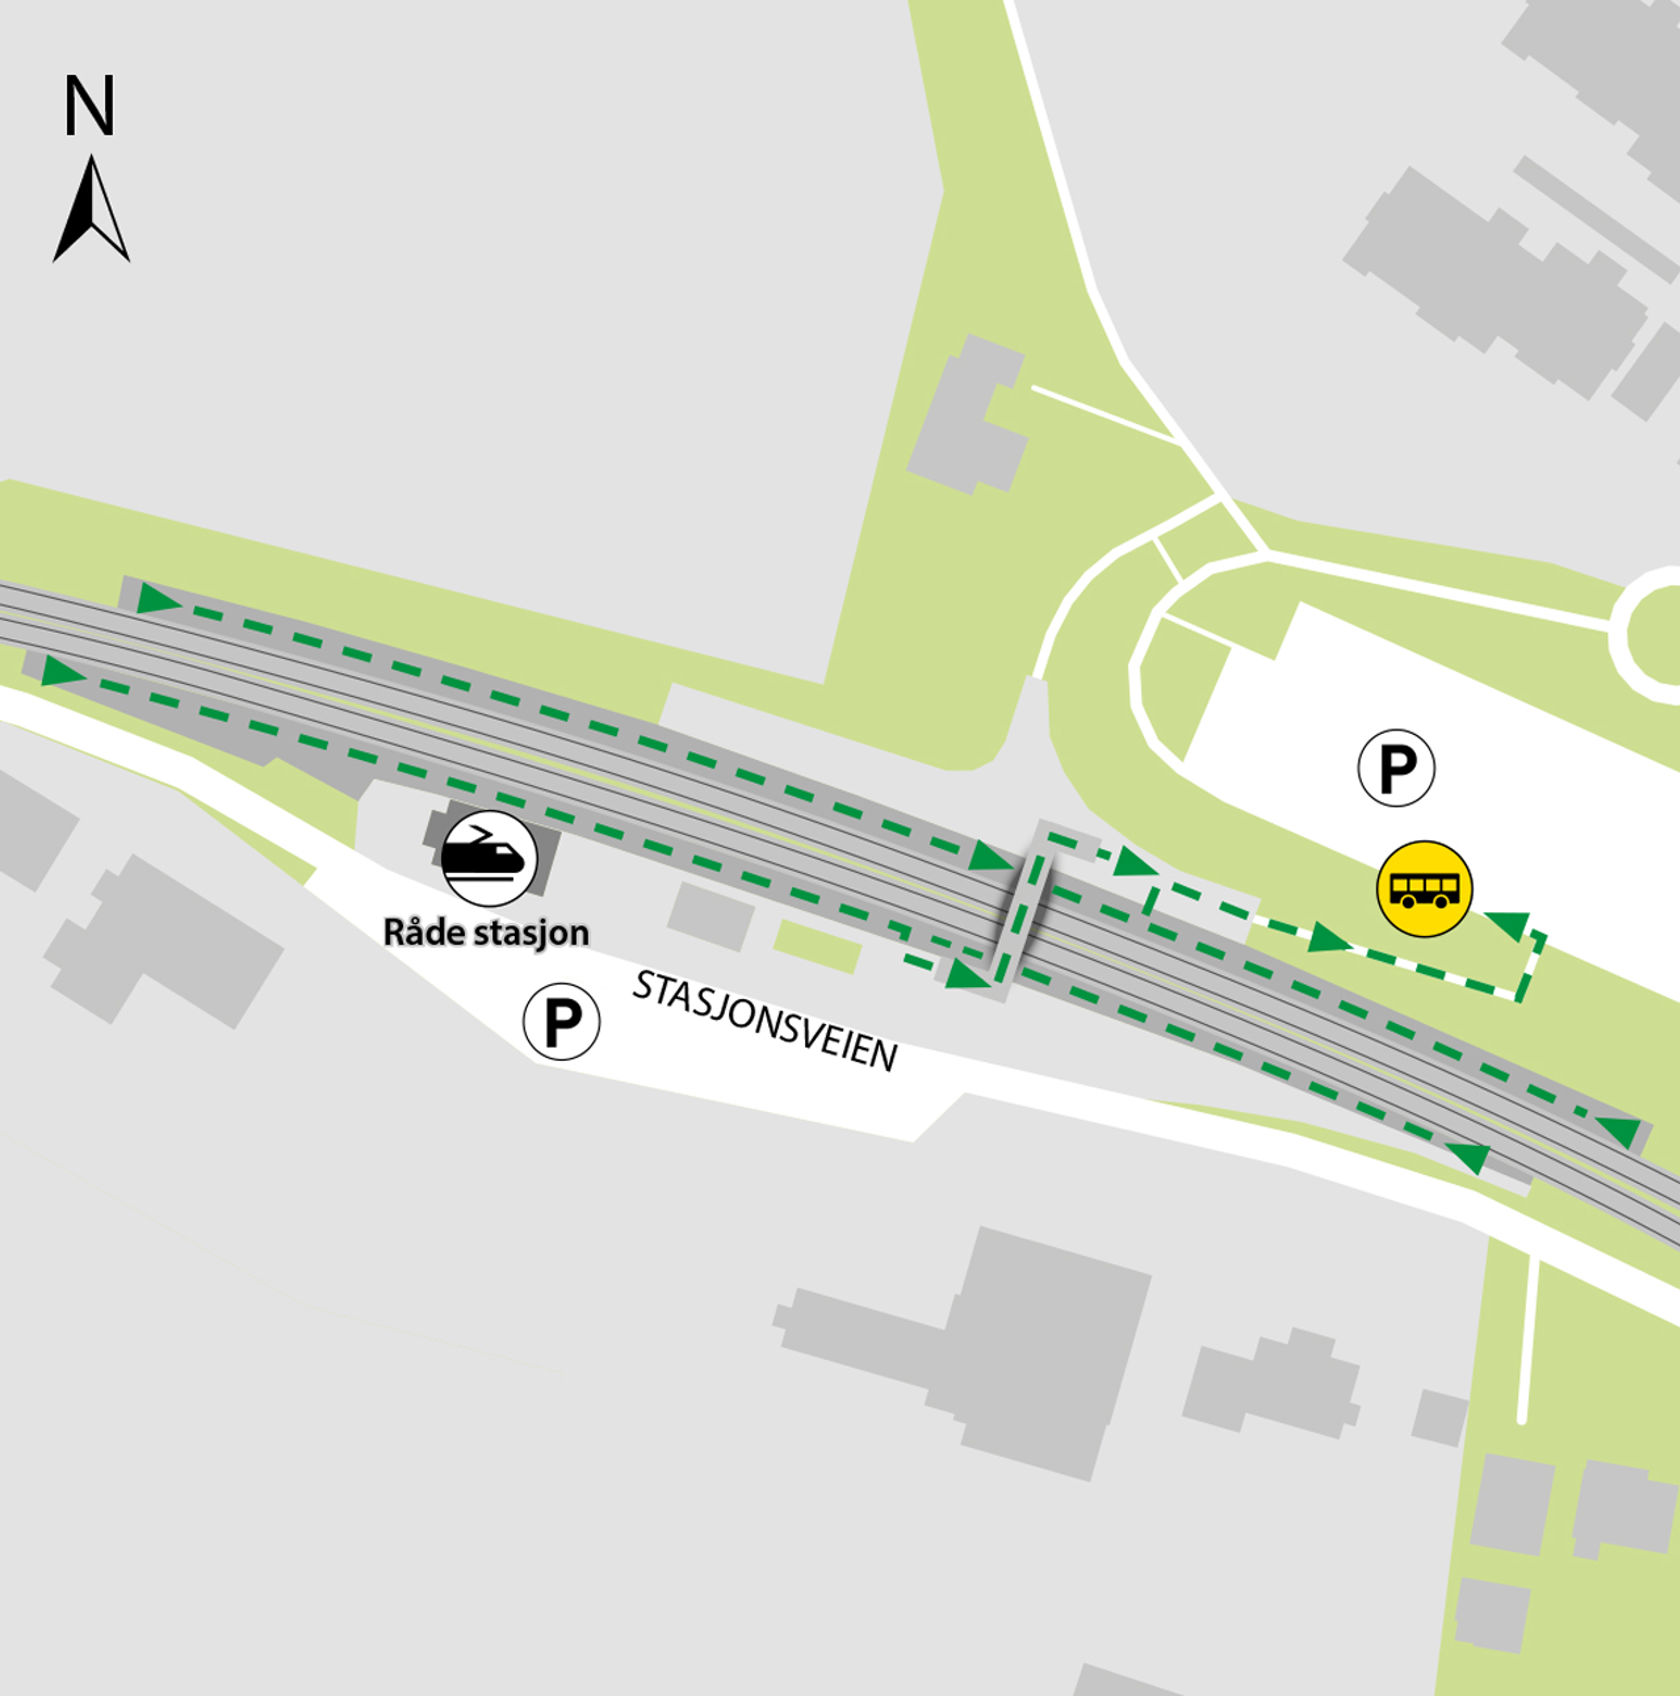 Map shows rail replacement service departs from bus stop Råde station.